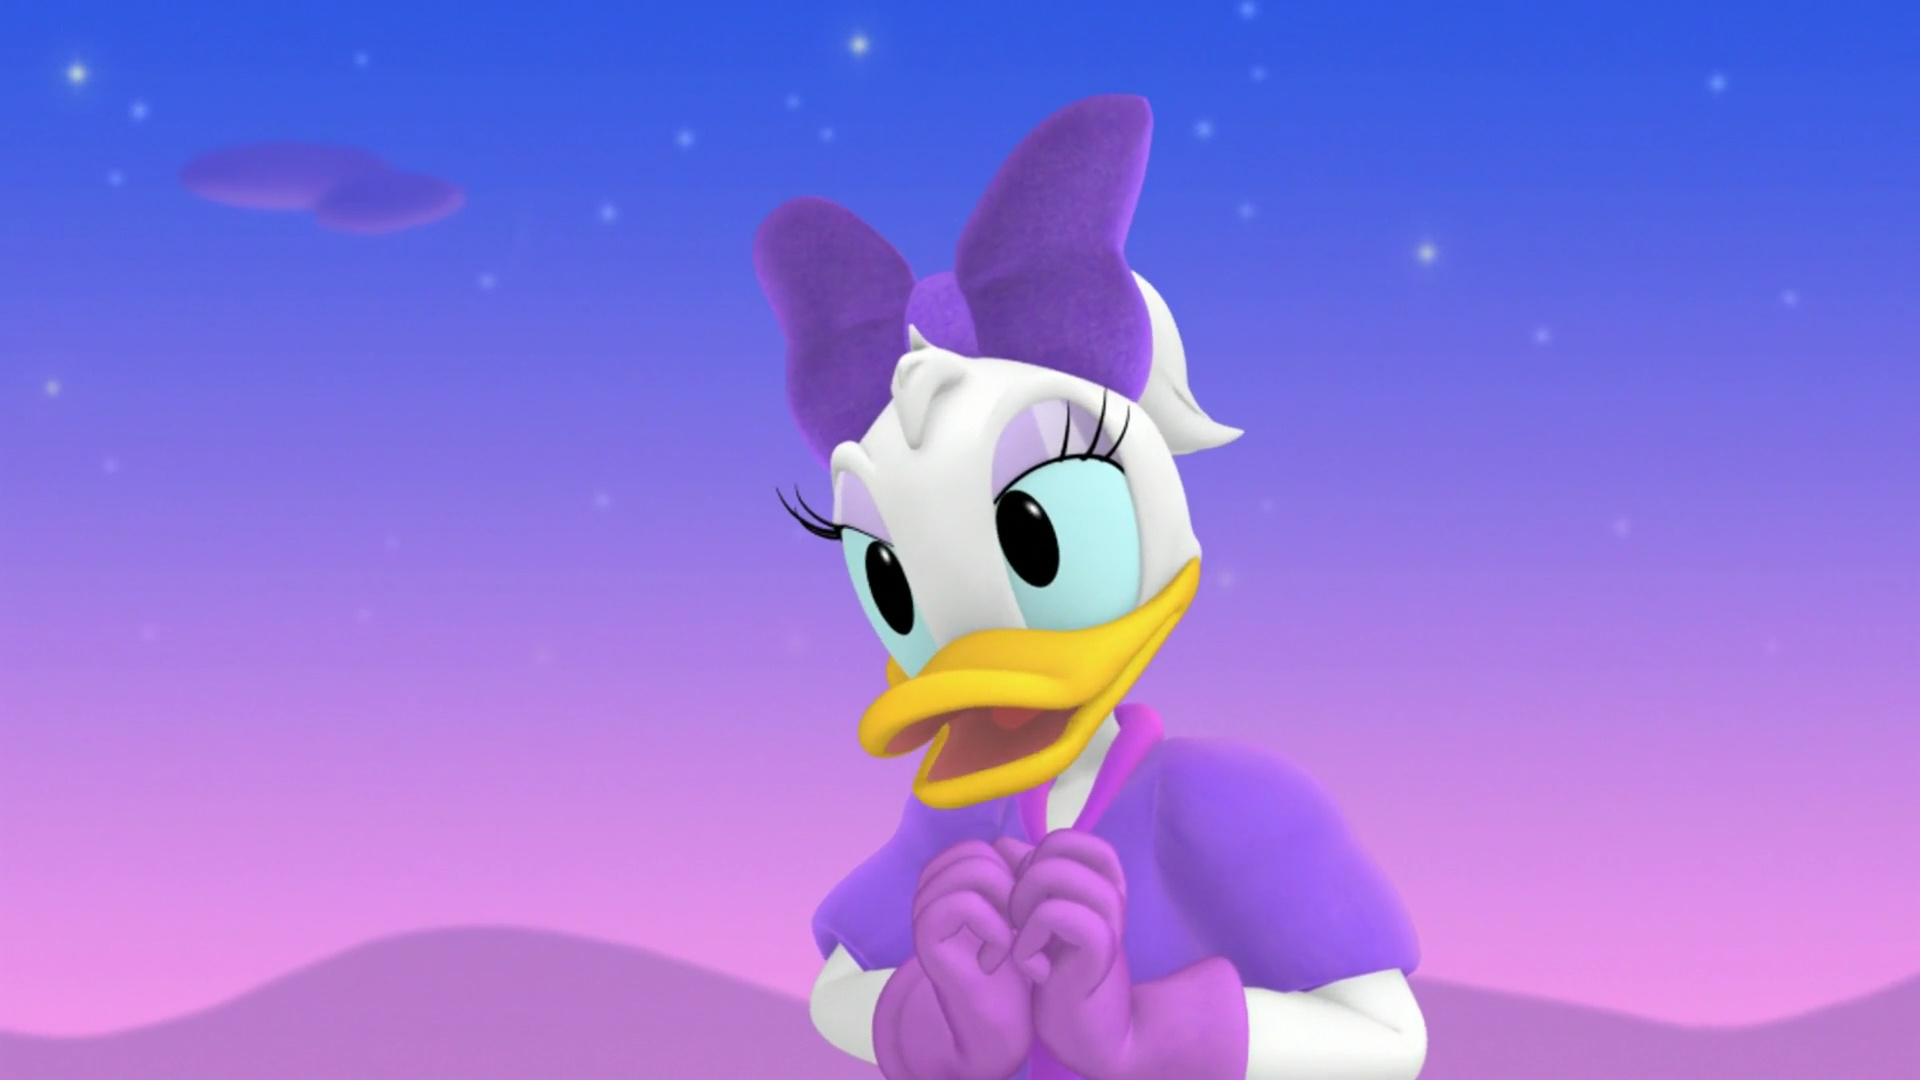 Daisy Duck, Mickey Mouse, Disney images, Pictures, 1920x1080 Full HD Desktop